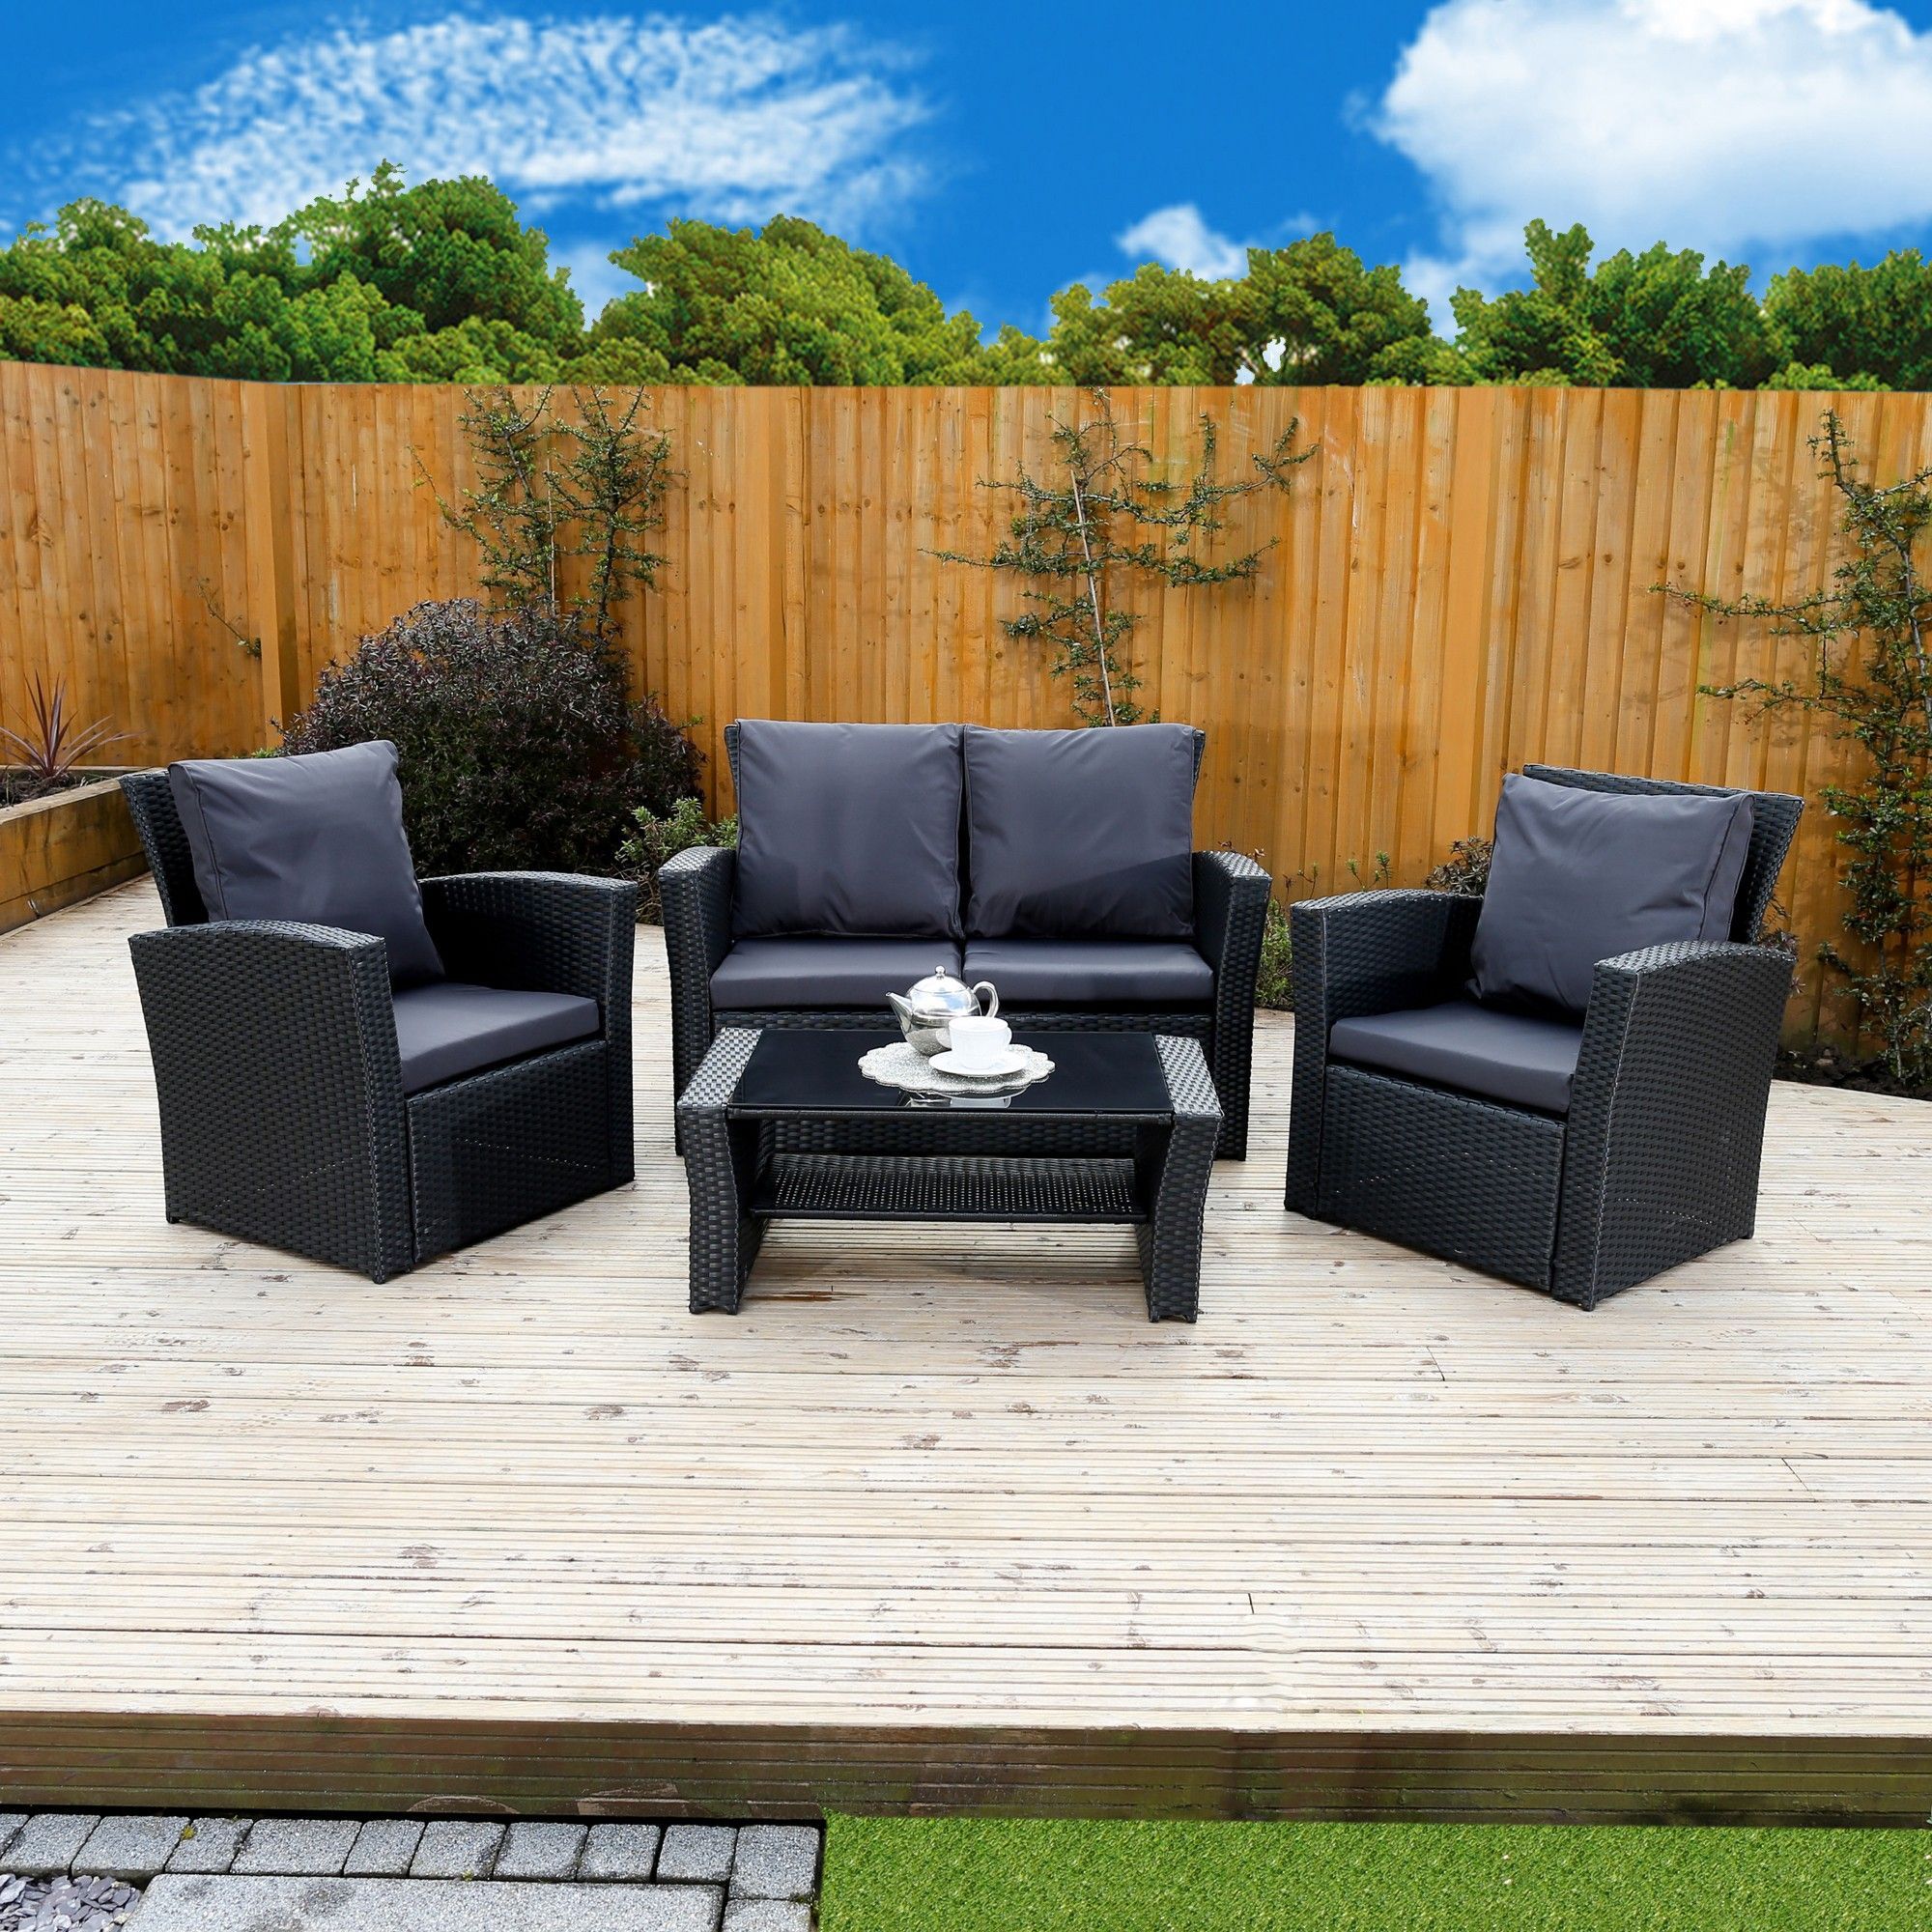 4 Piece Algarve Rattan Sofa Set In Black With Dark For Black And Tan Rattan Console Tables (View 14 of 20)